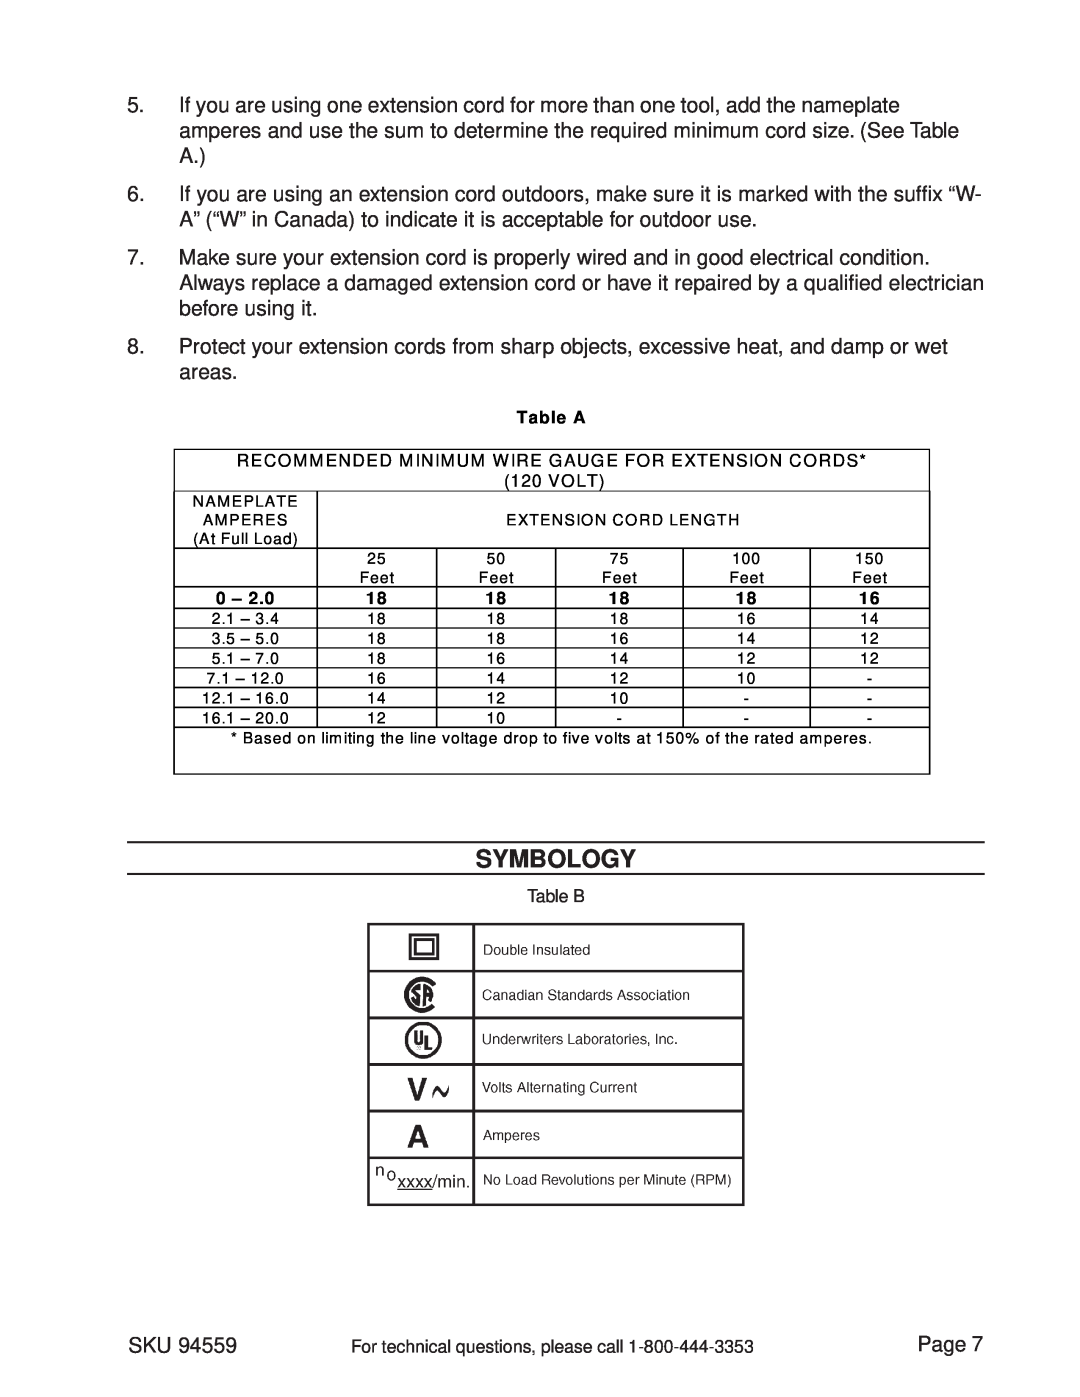 Harbor Freight Tools 94559 manual Symbology, Table A 